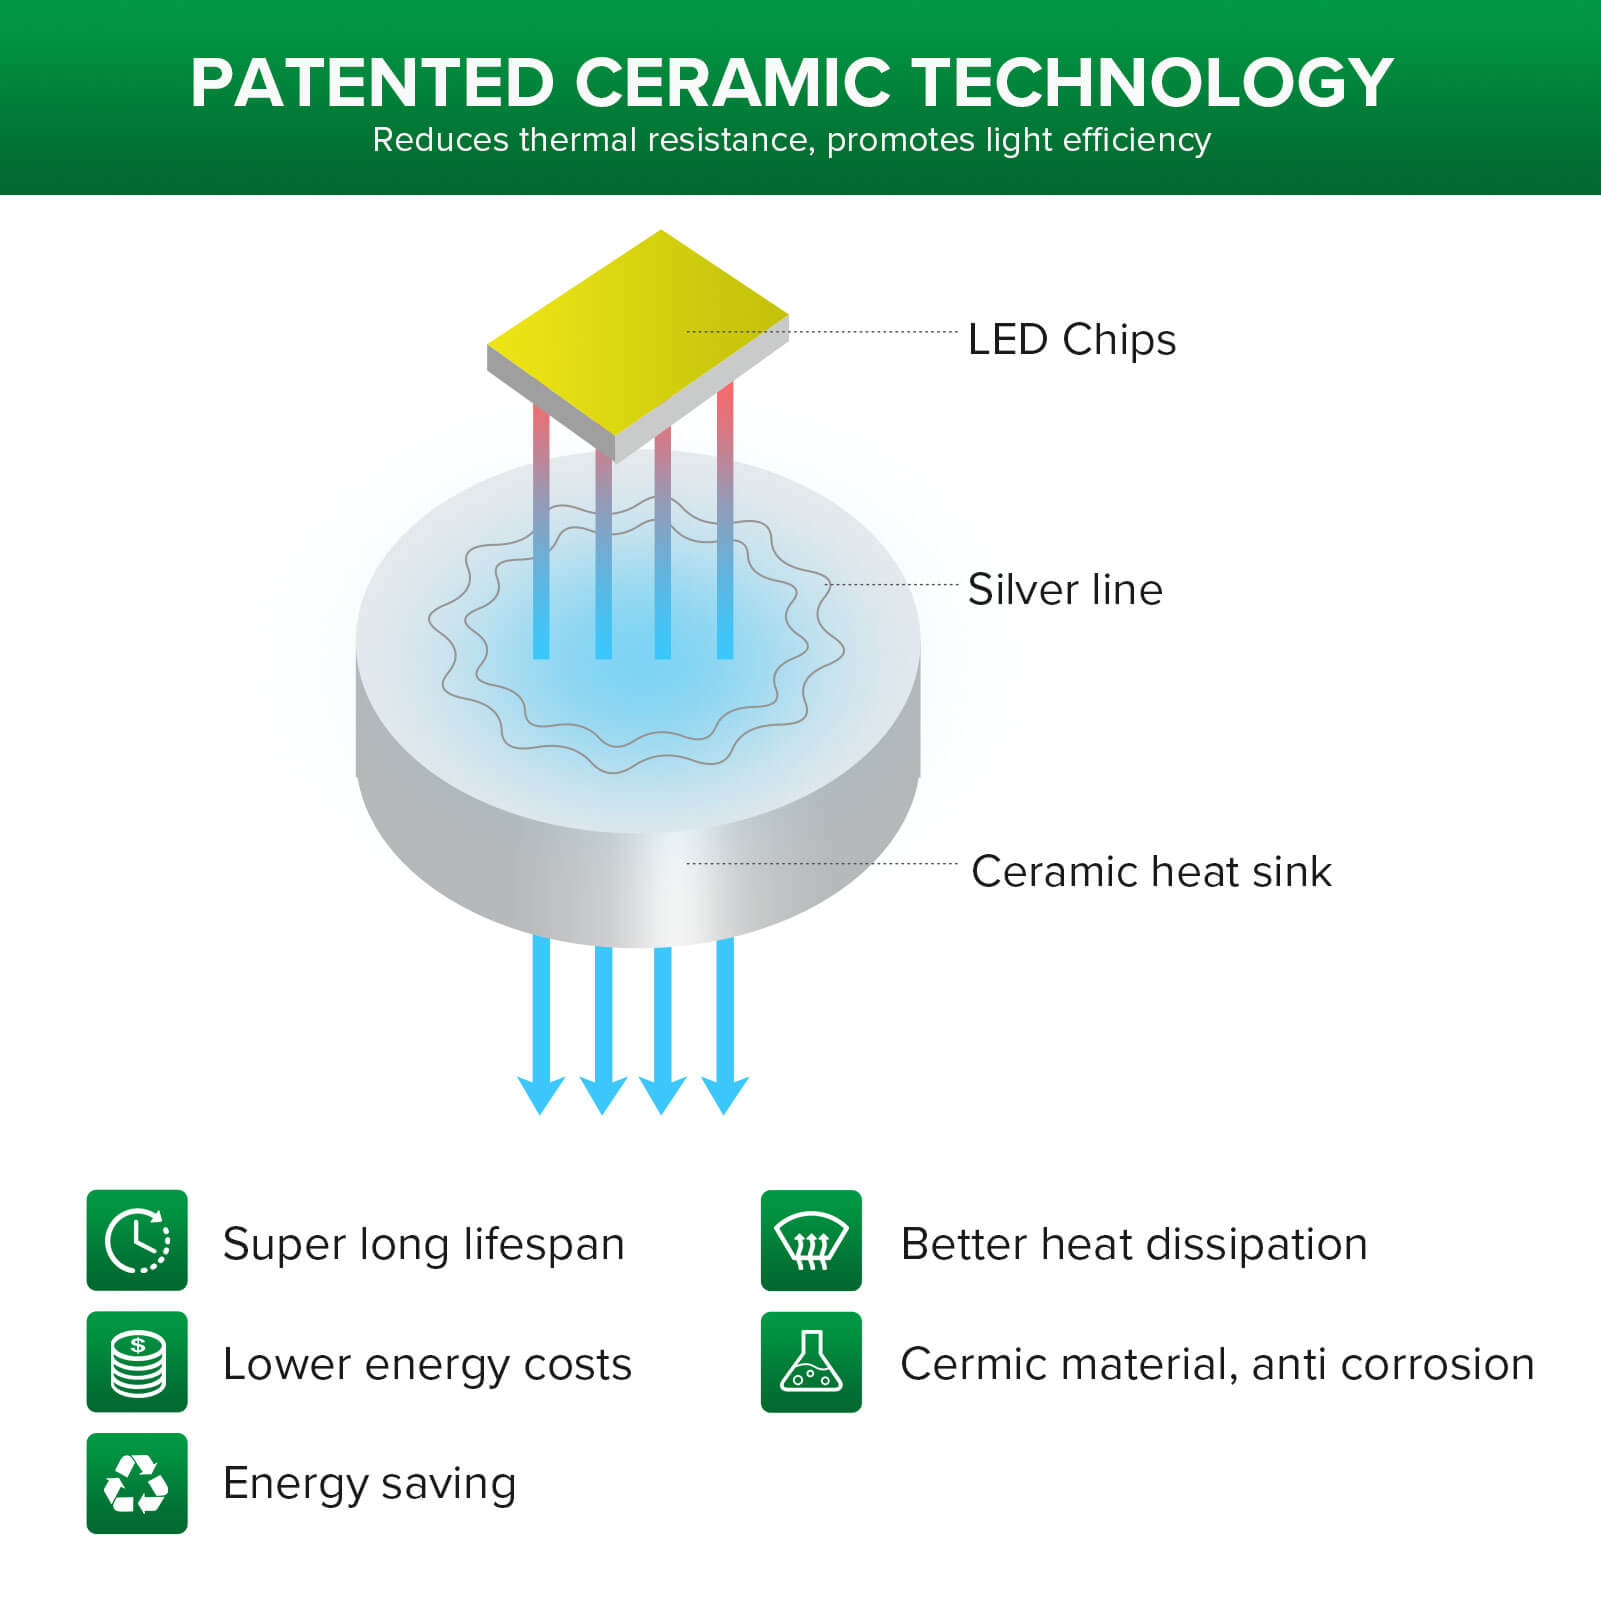 PATENTED CERAMIC TECHNOLOGY: Reduces thermal resistance, promotes light efficiency.